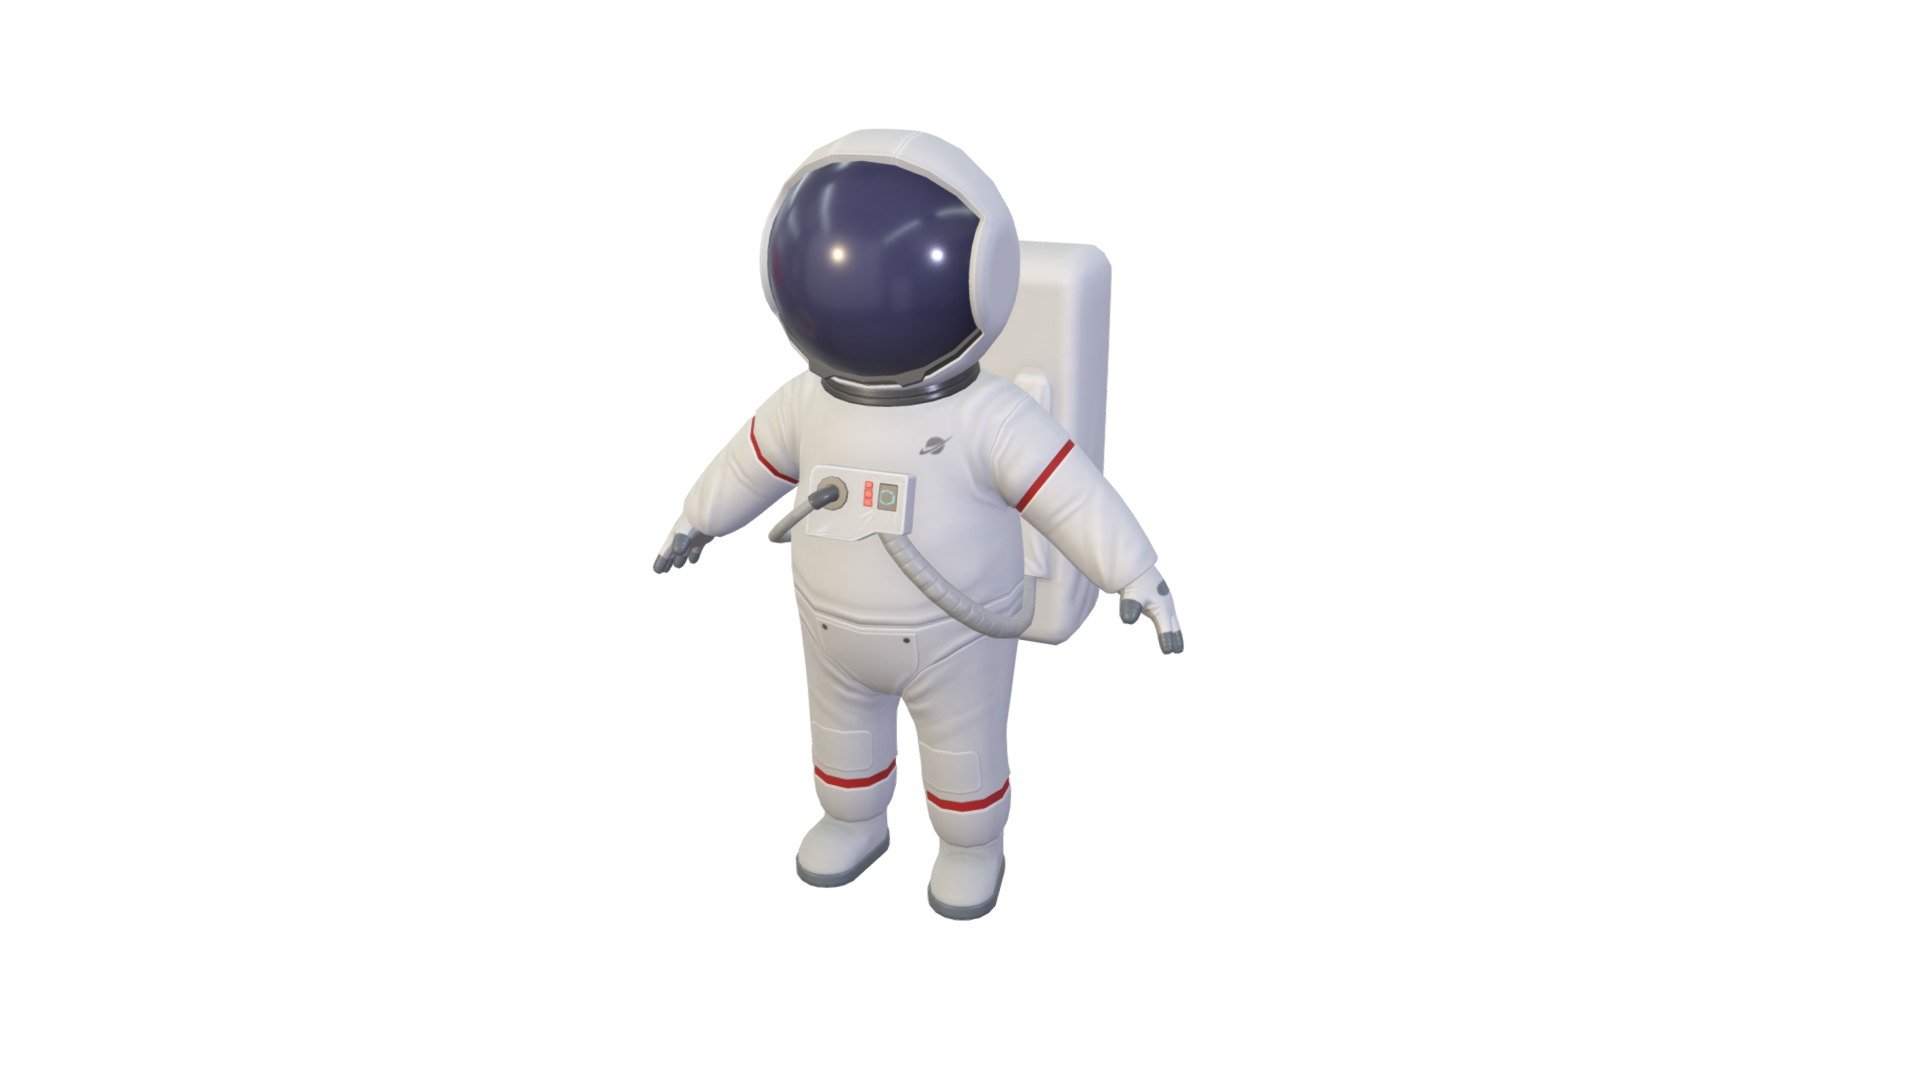 astronaut-buy-royalty-free-3d-model-by-bariacg-07e5384-sketchfab